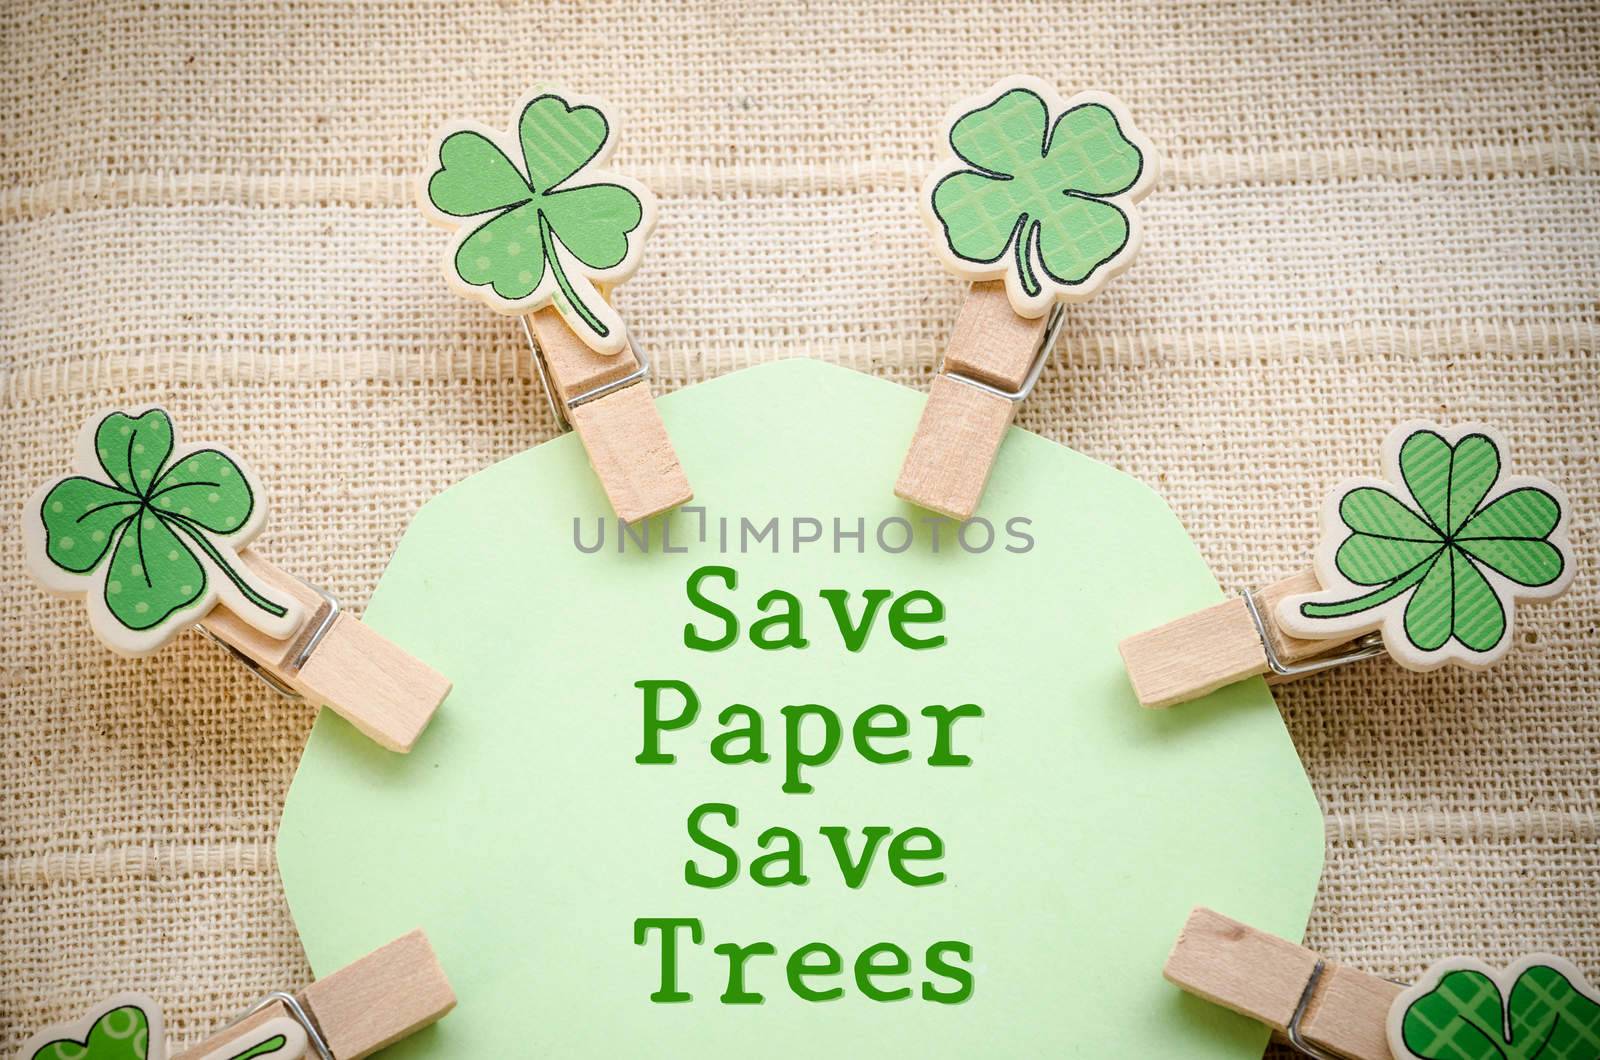 Save paper save trees. by Gamjai